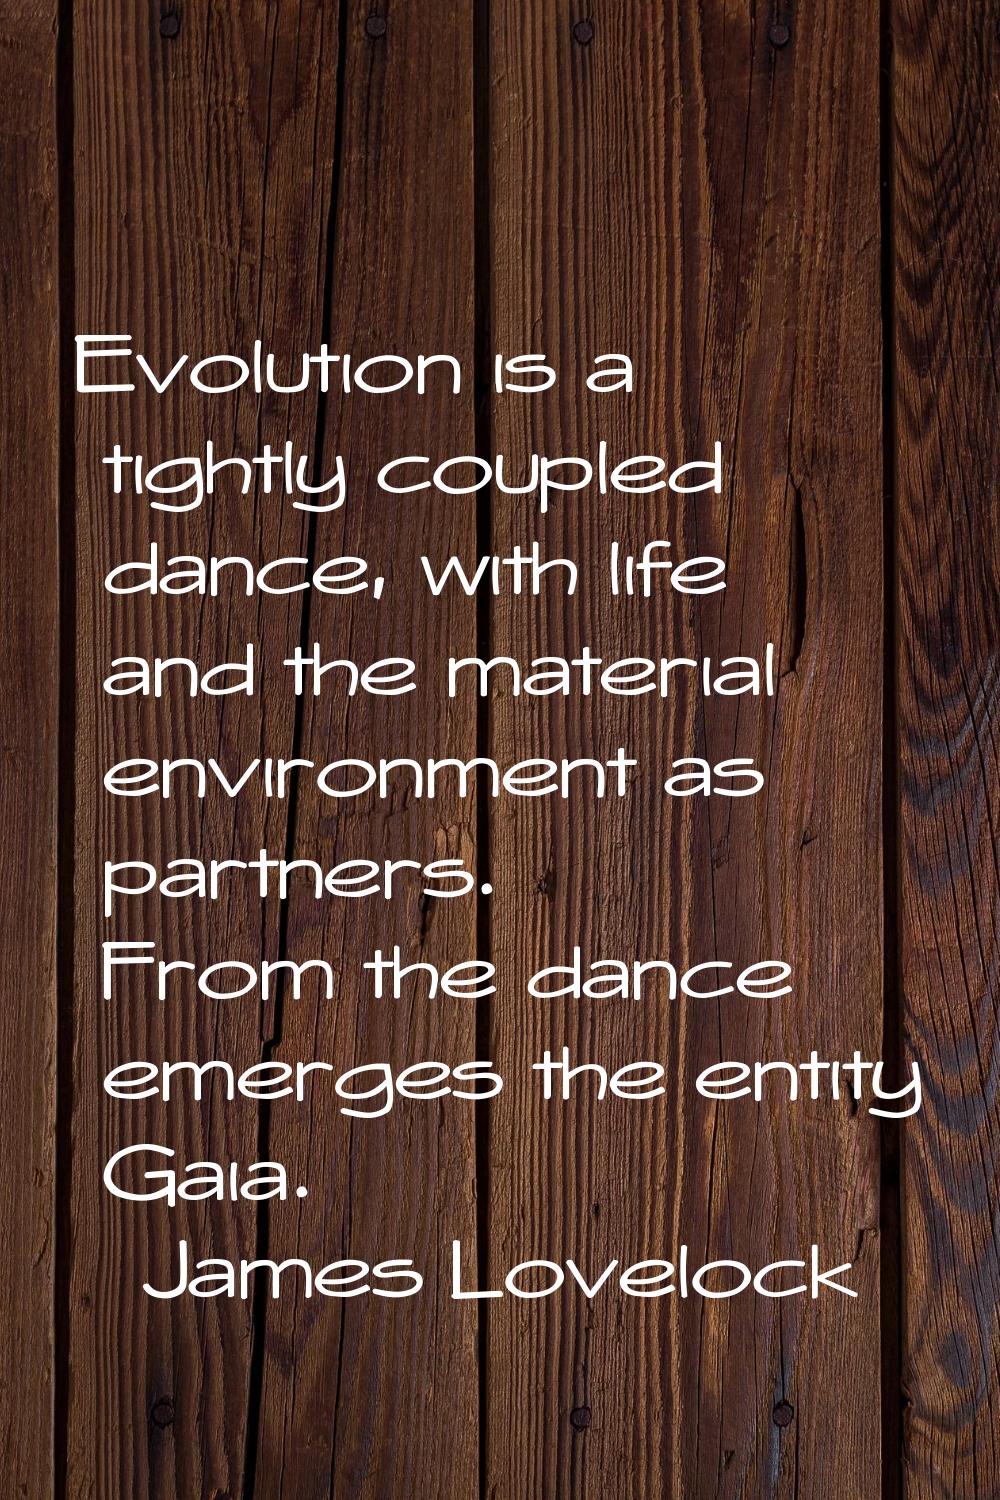 Evolution is a tightly coupled dance, with life and the material environment as partners. From the 